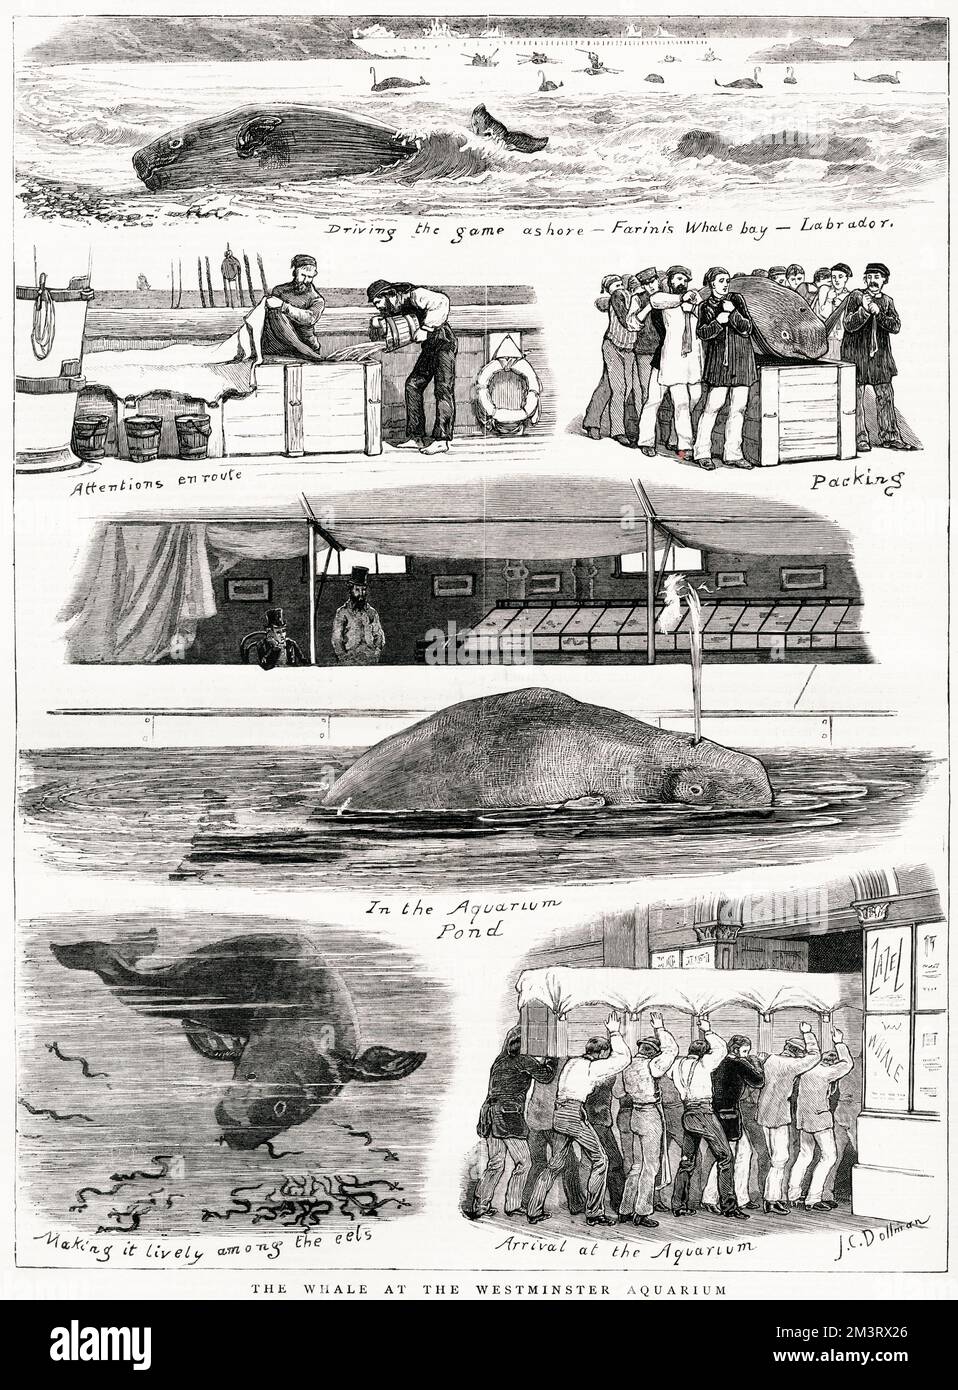 The Whale at the Westminster Aquarium - capture, transportation to London, attention en route, arrival and finally swimming in the Aquarium pond.     Date: 1877 Stock Photo